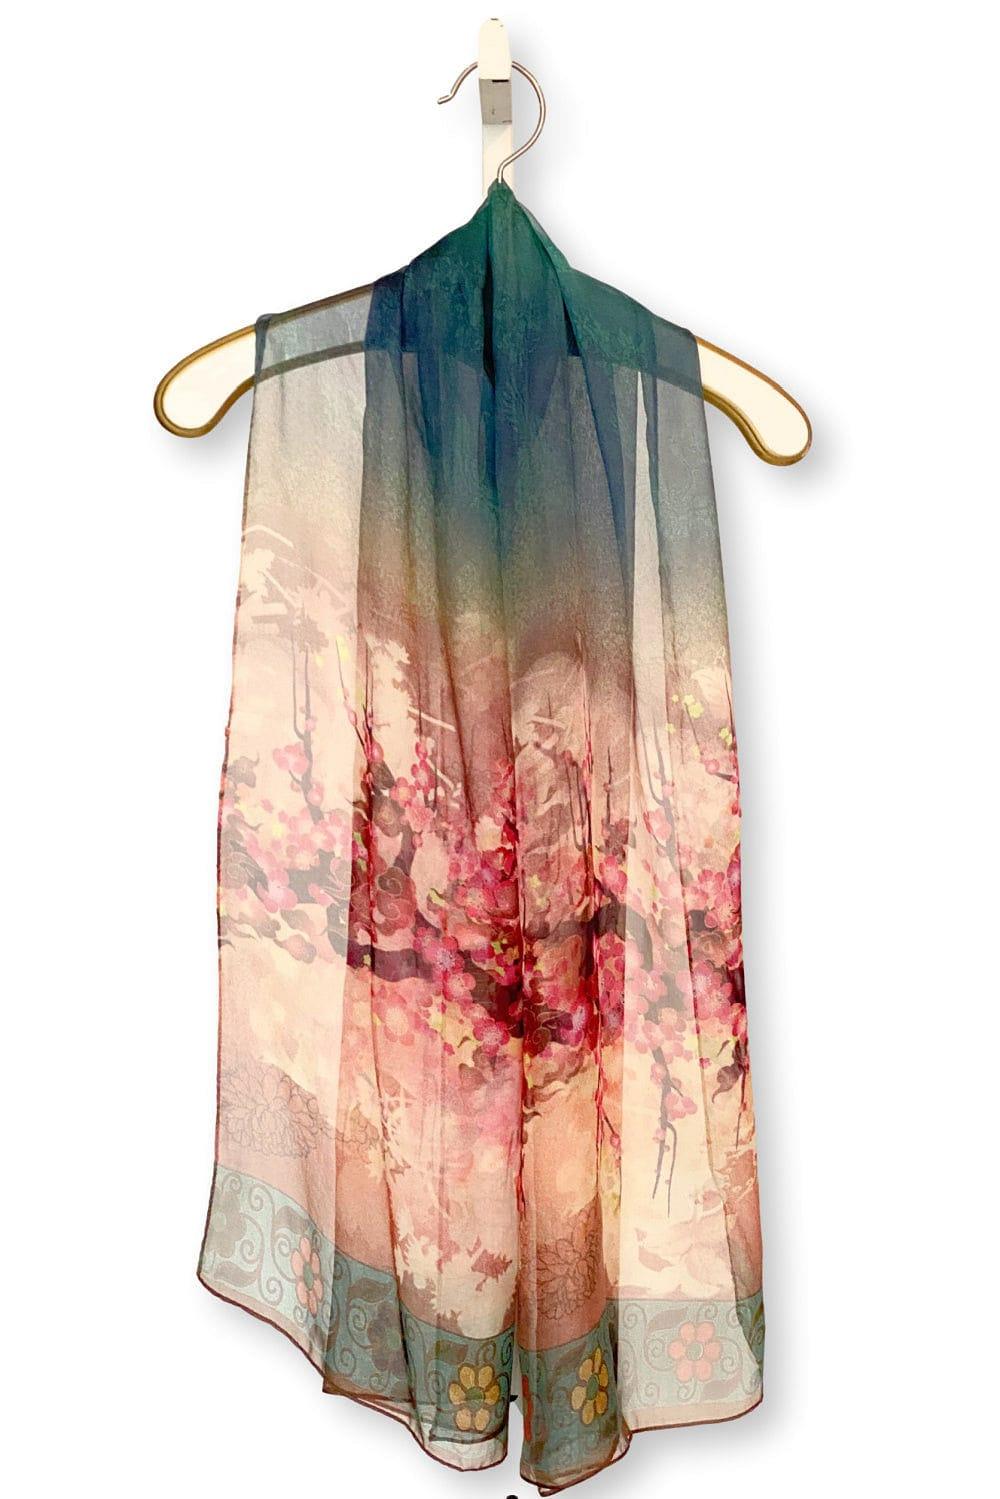 Sheer silk scarf designed with red blossom on tree branches design. It is draped over a creme antique hanger with gold trim. 